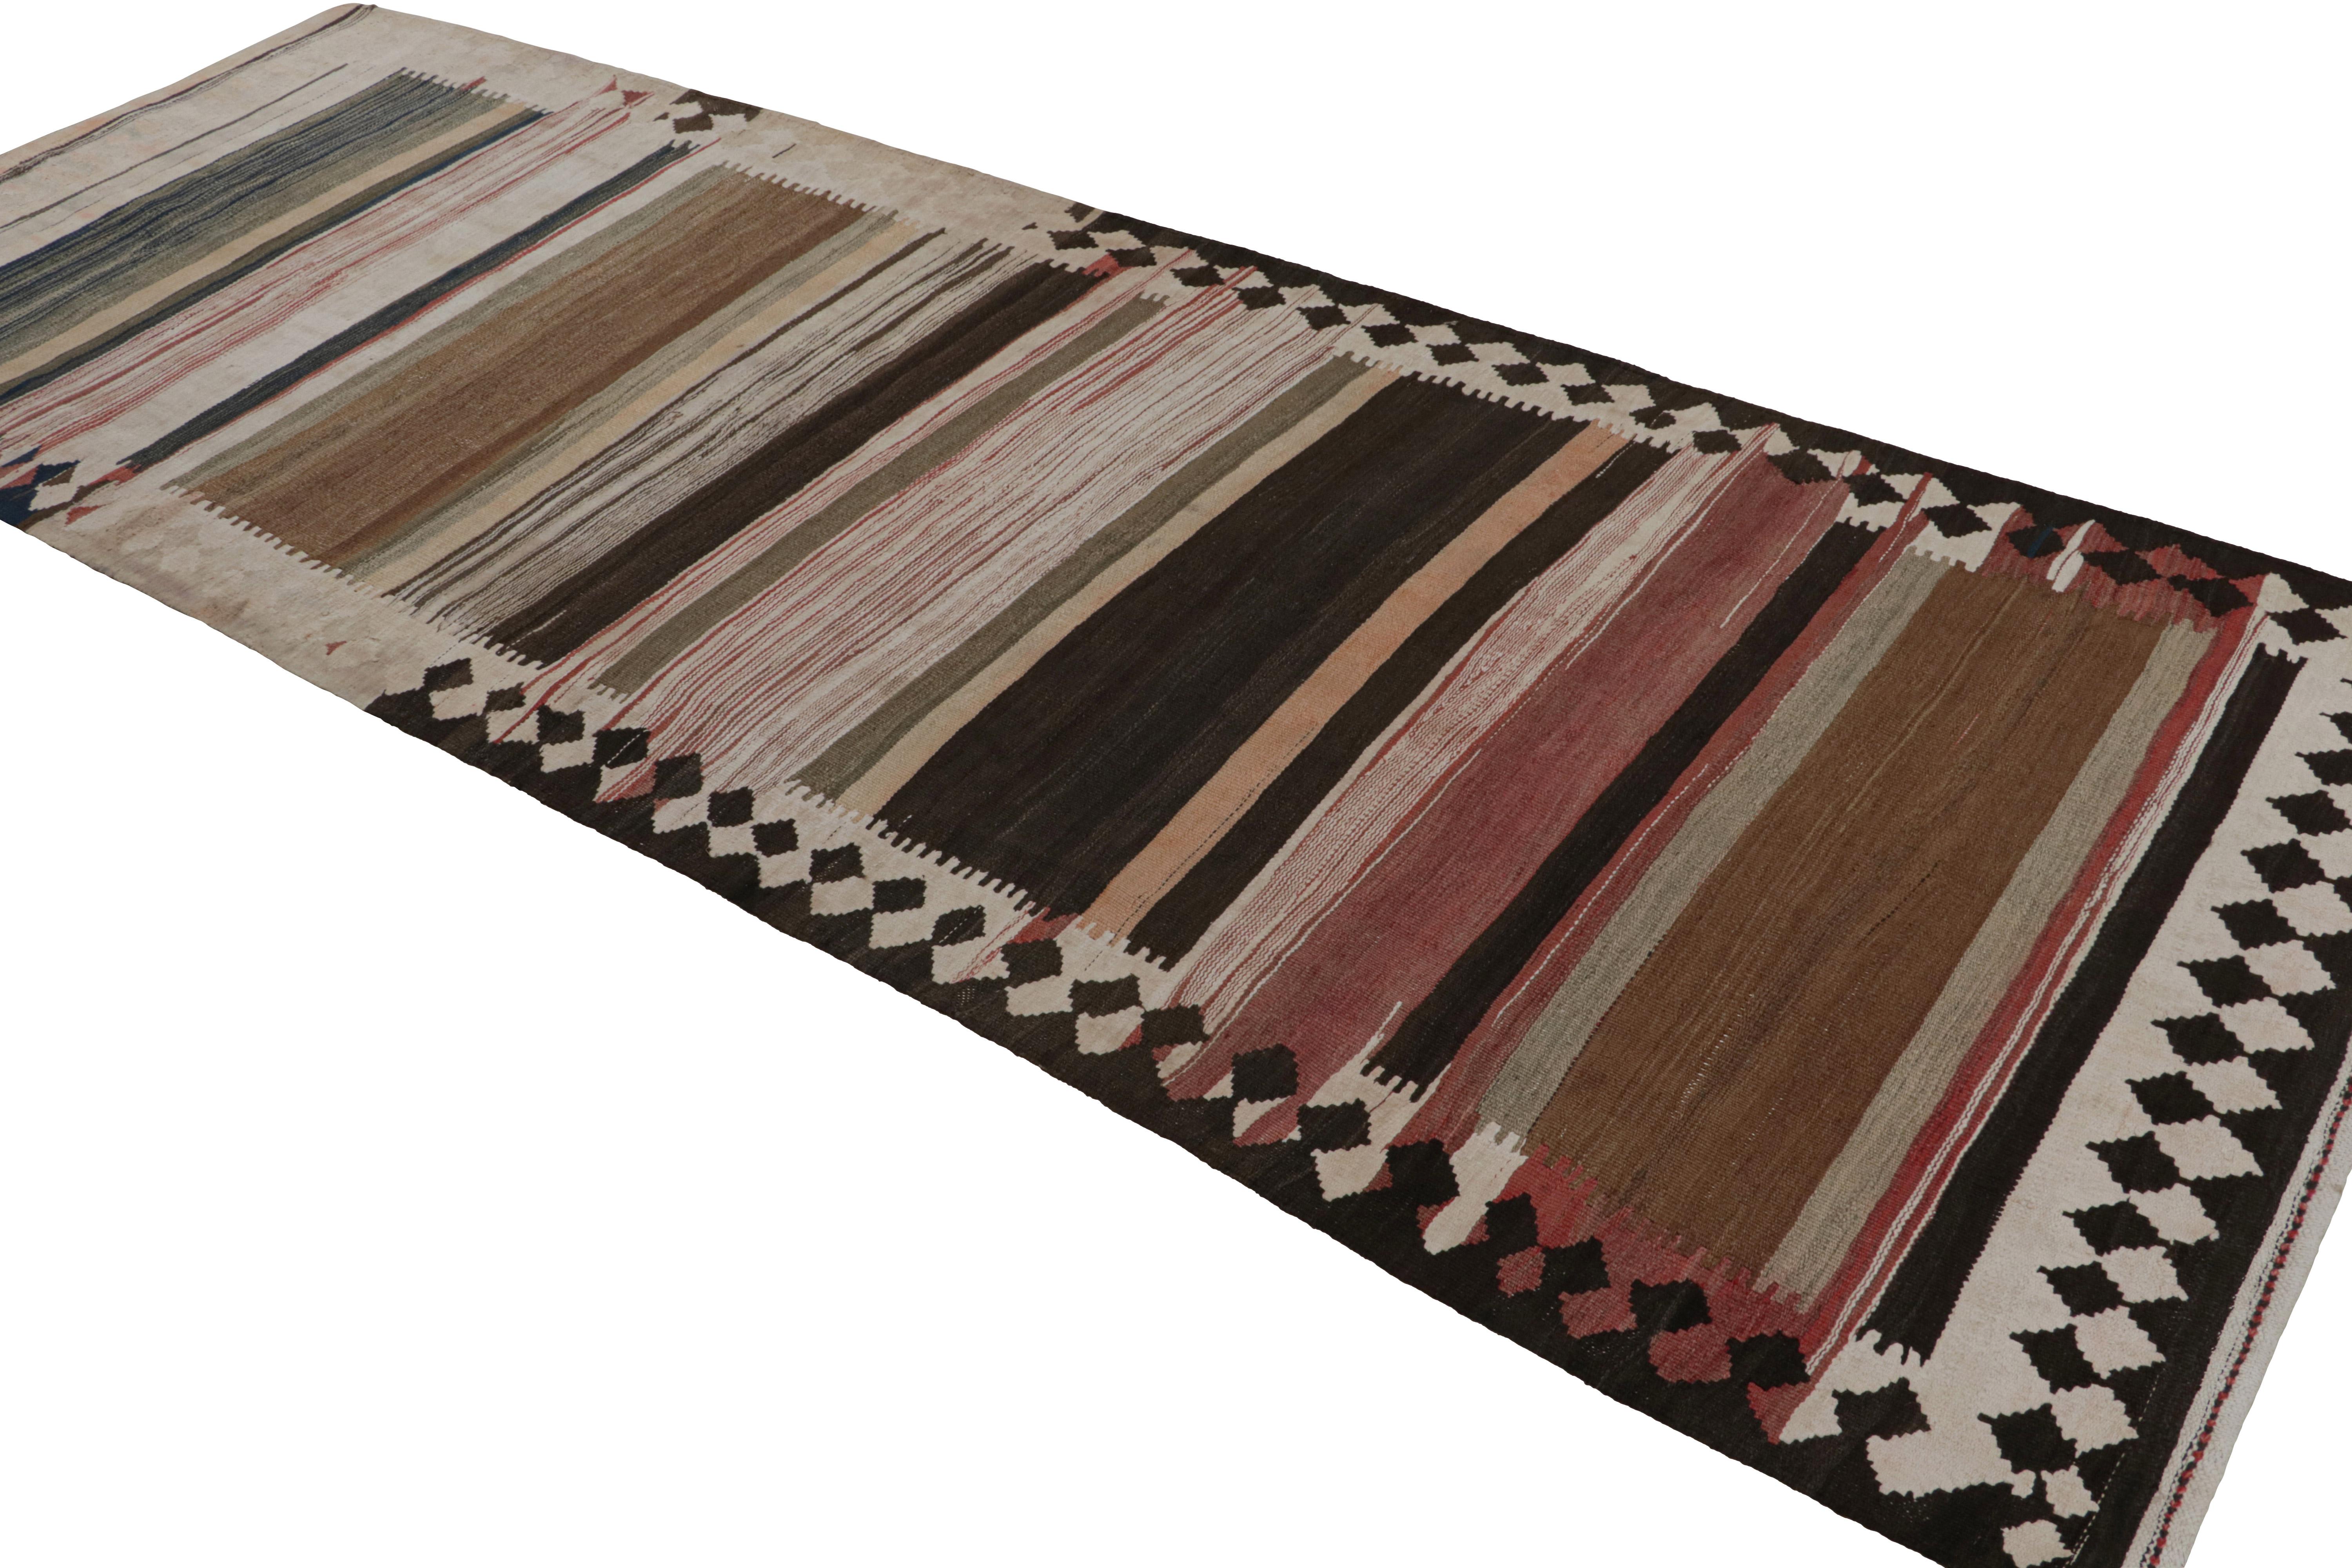 Featuring a colorway of Beige/brown, black, pink, and silver/gray, this 4x10 vintage Persian tribal kilim rug, handwoven in wool, circa 1950-1960, is a playful departure from other striped pieces of its period. 

On the Design: 

As a distinct